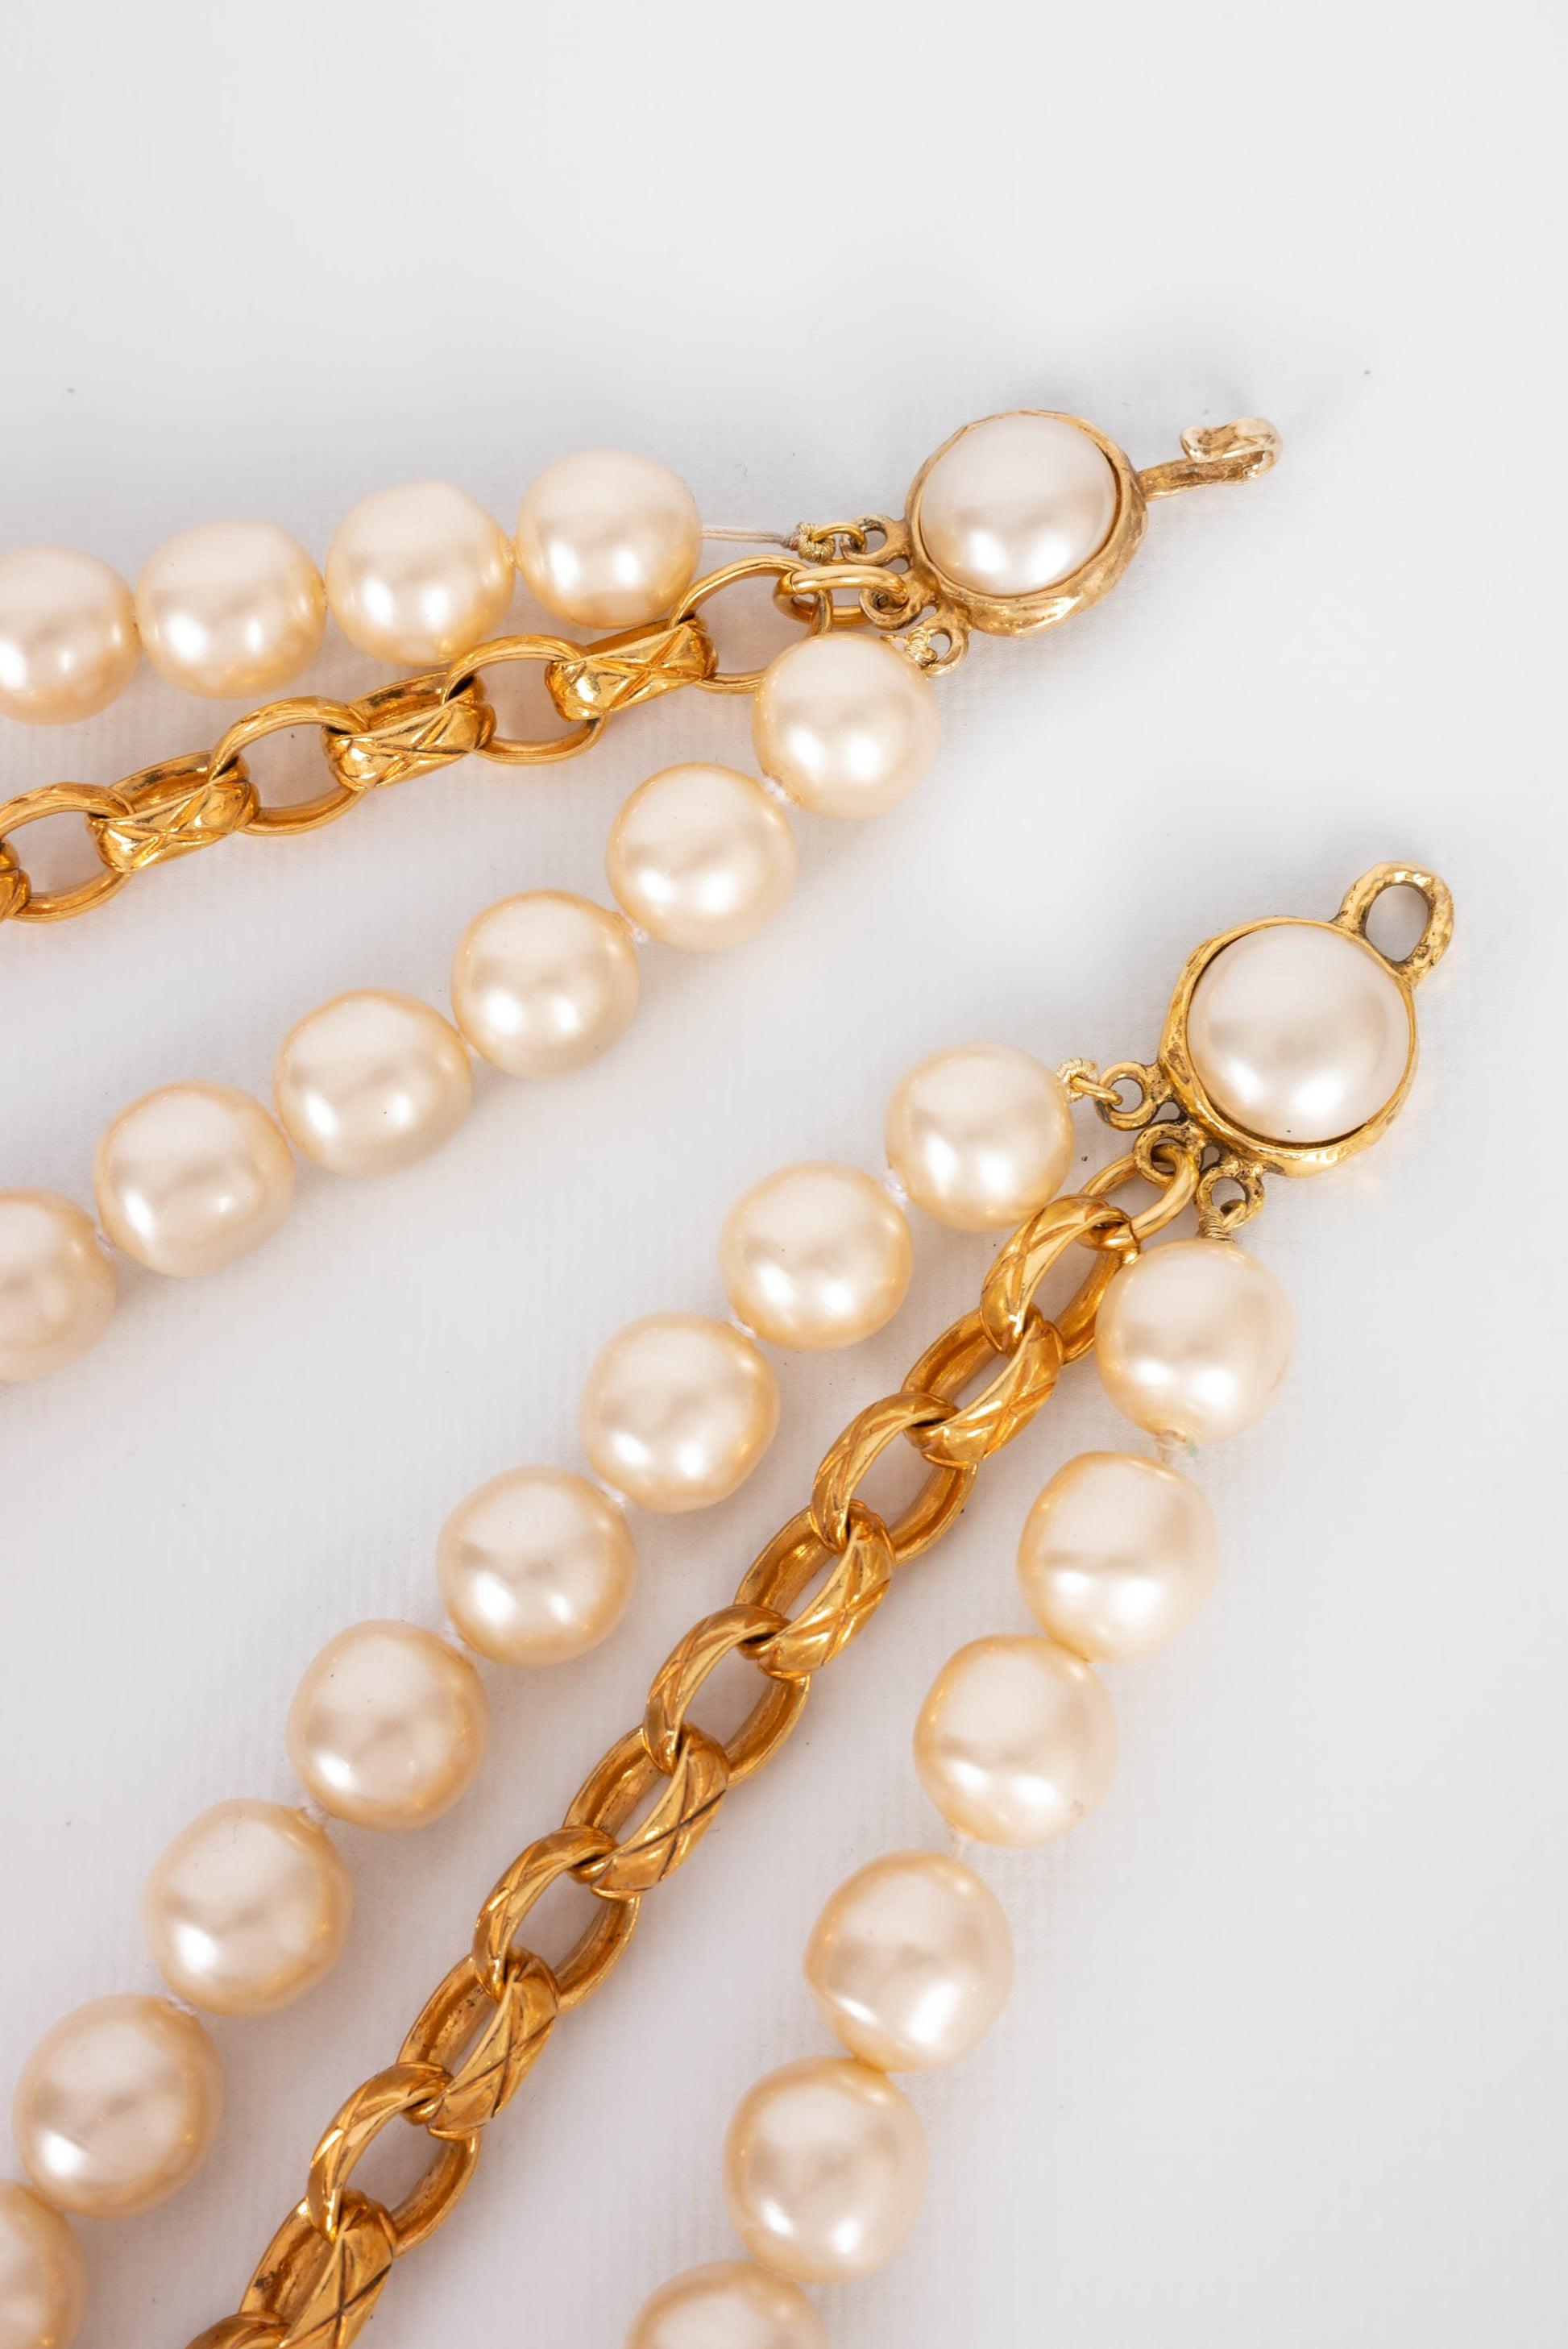 Chanel (Made in France) Necklace in gold-plated metal and costume pearly beads. Jewelry from the beginning of the 1990s.

Additional Information:
Condition: Very good condition
Dimensions: Length of the shorter row: 50 cm
Period: 20th